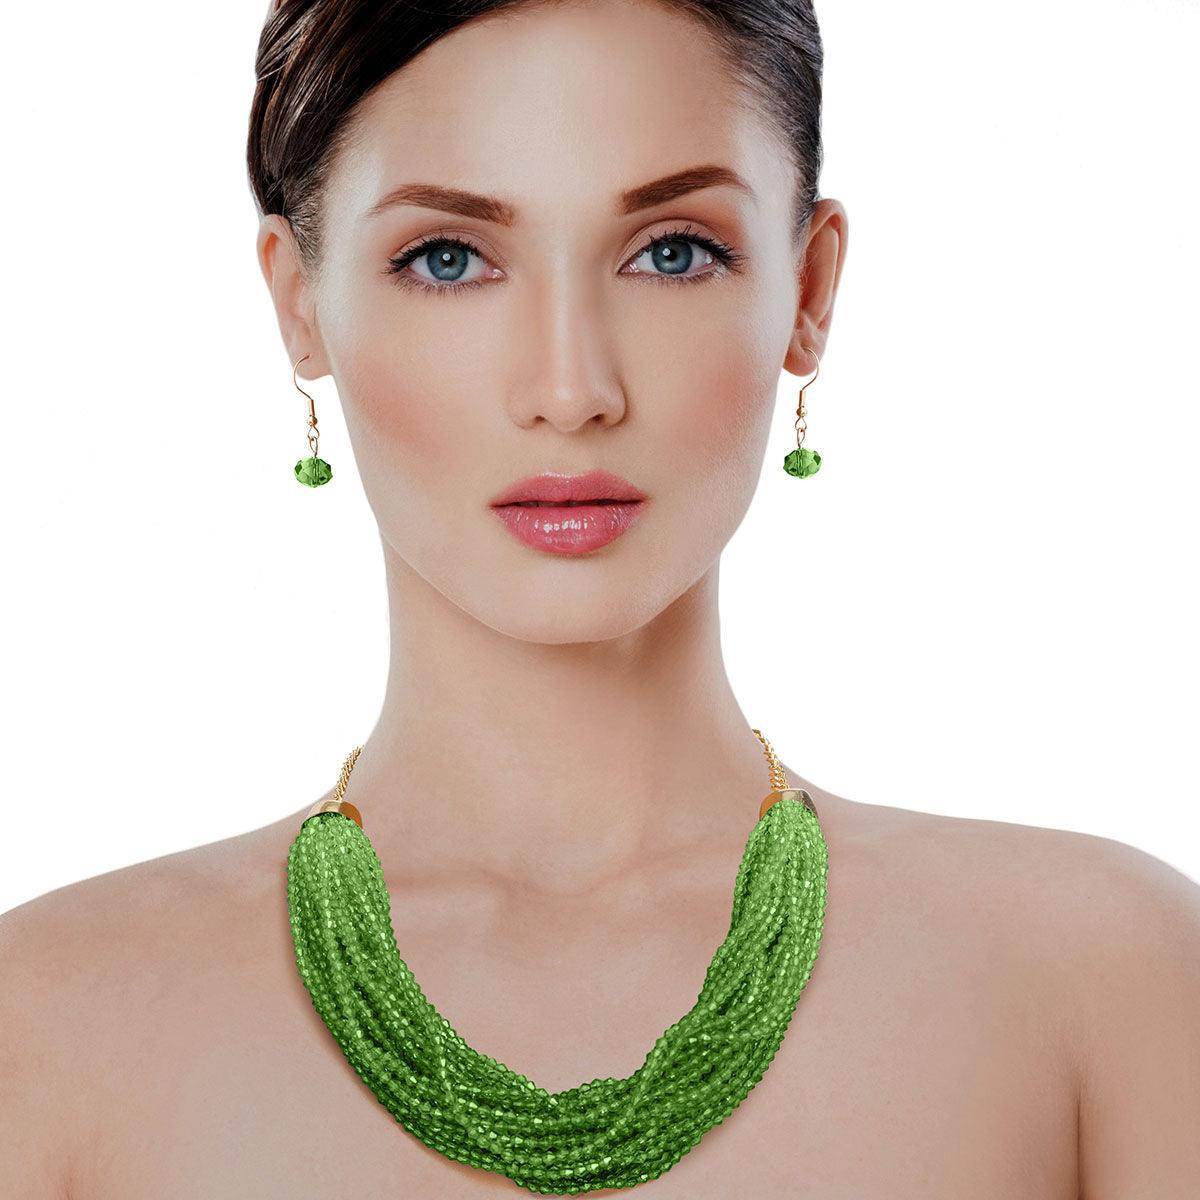 Green Bead Multi Strand Necklace with Earrings